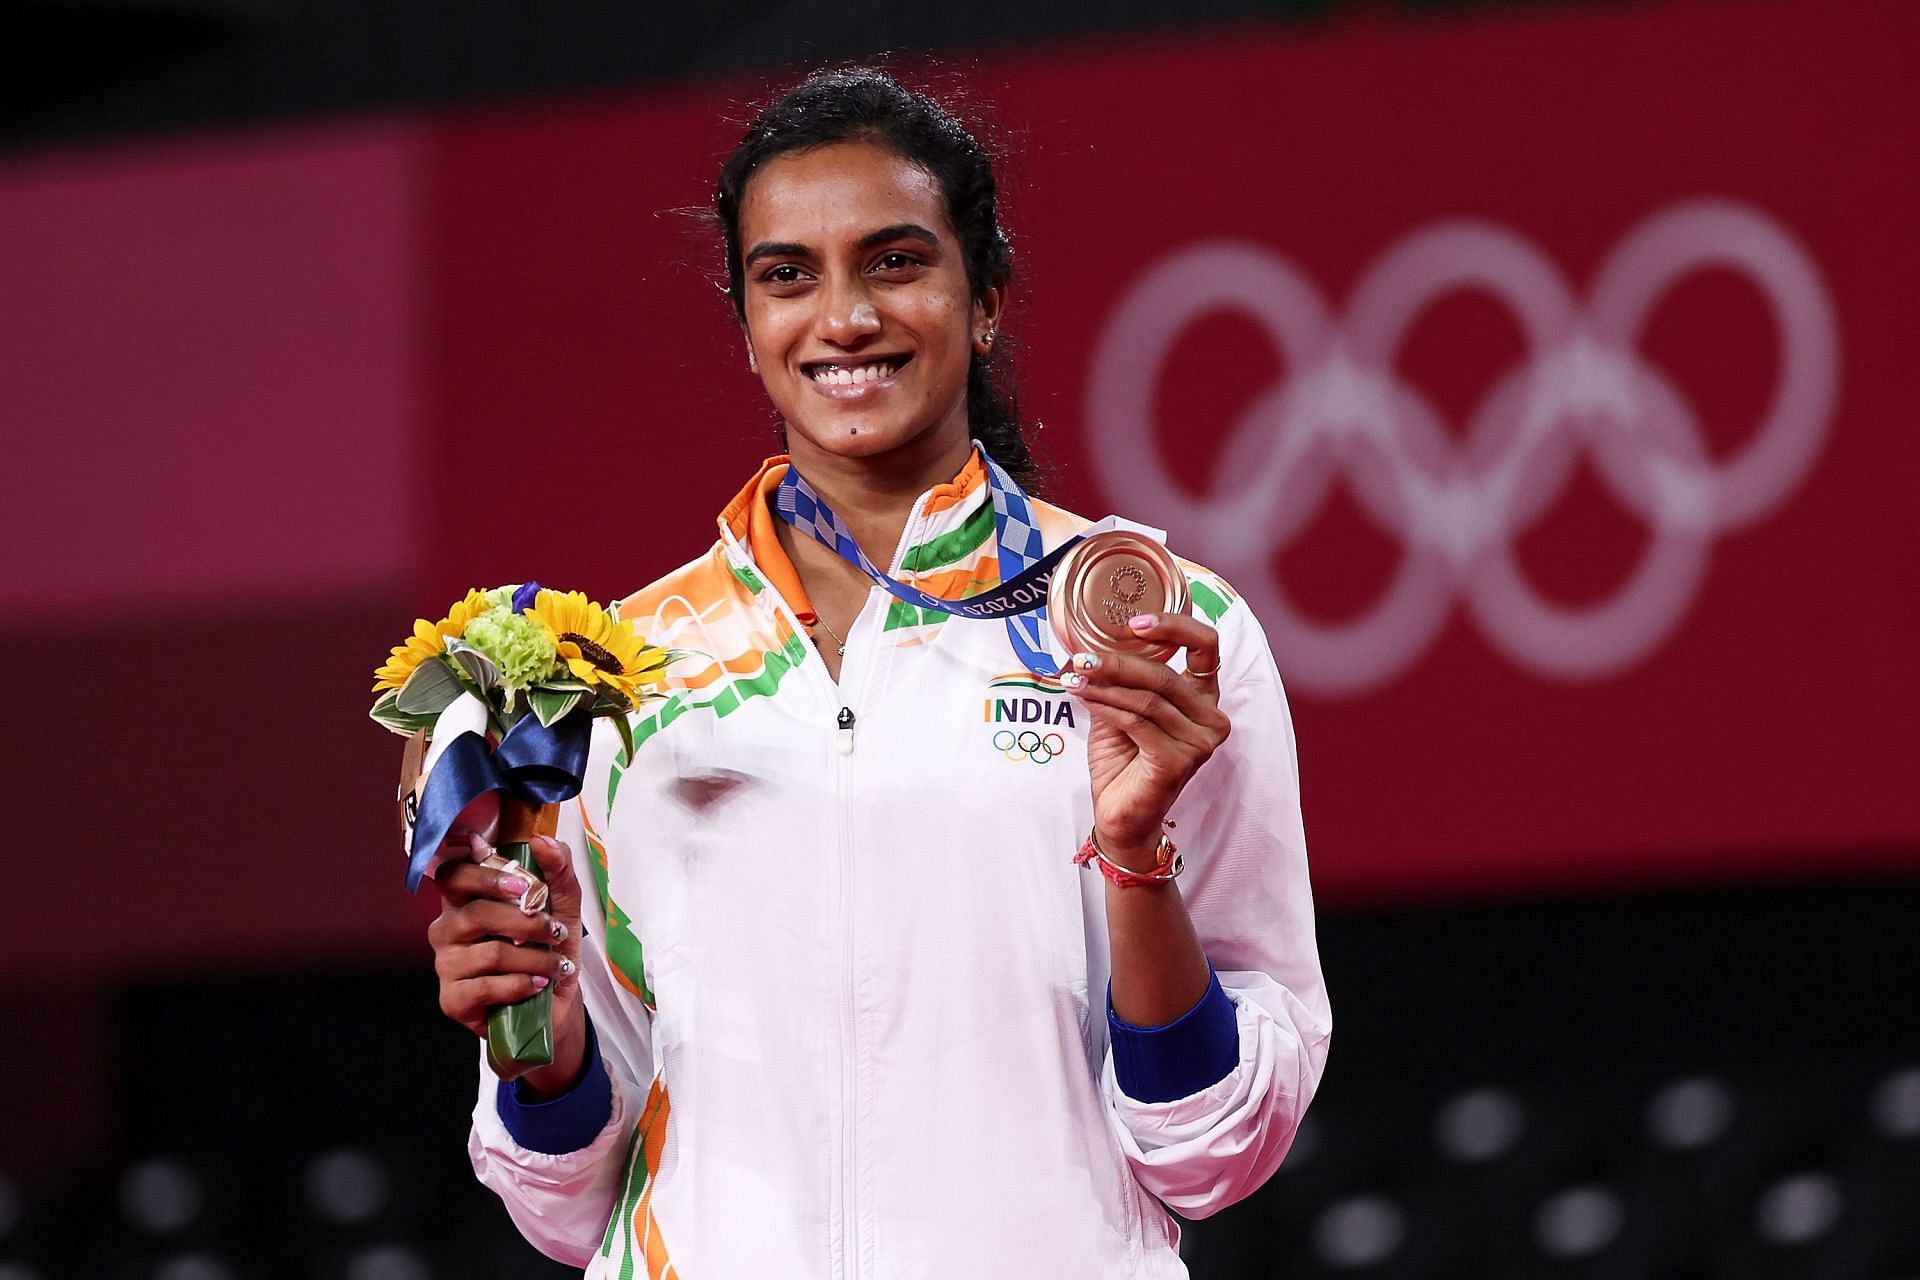 PV Sindhu celebrates her bronze medal win at the BWF World Championships 2021